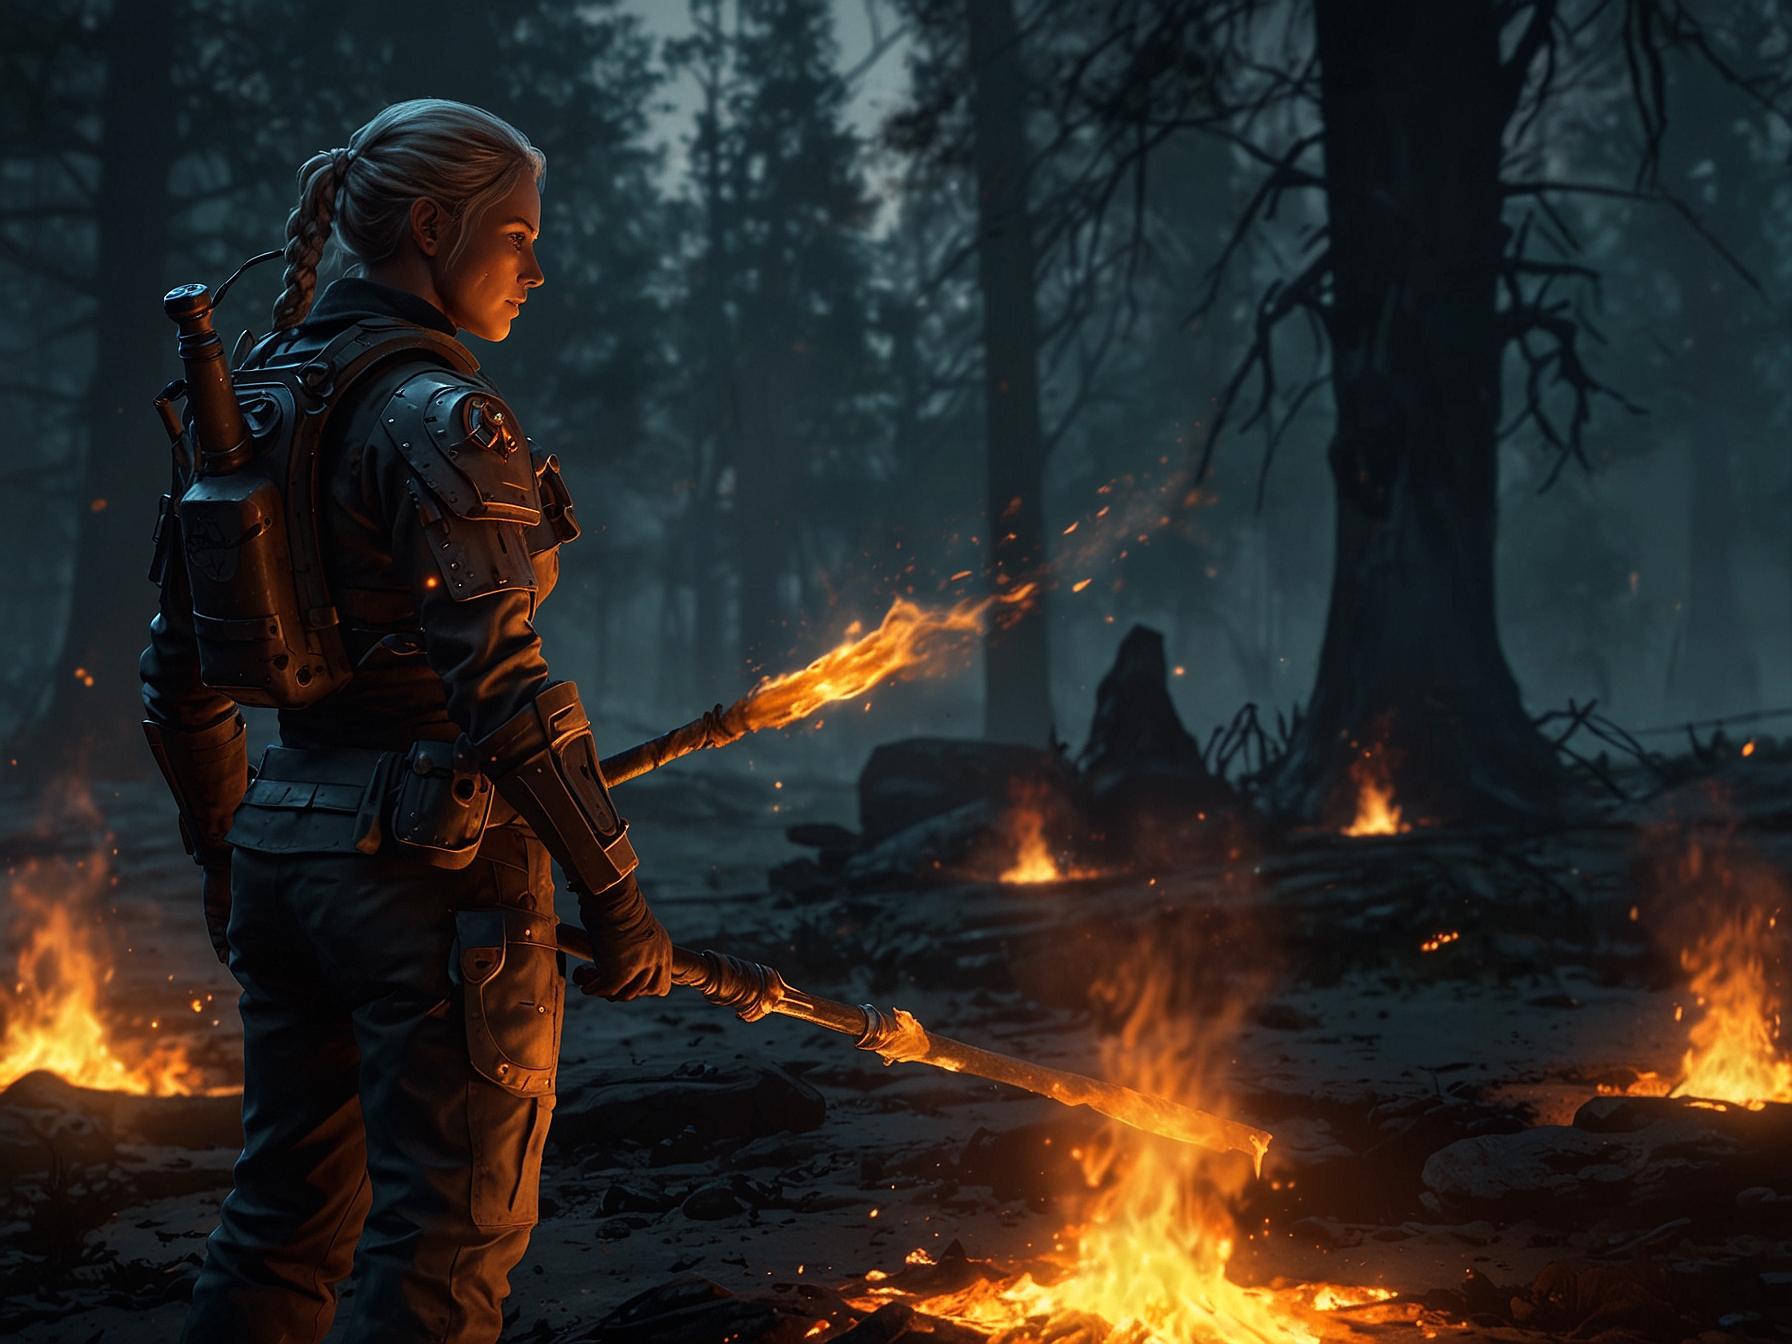 Screenshot of a character using potential new fire-resistant equipment to walk through flames, demonstrating proposed changes to improve player experience and strategy on Hellmire.